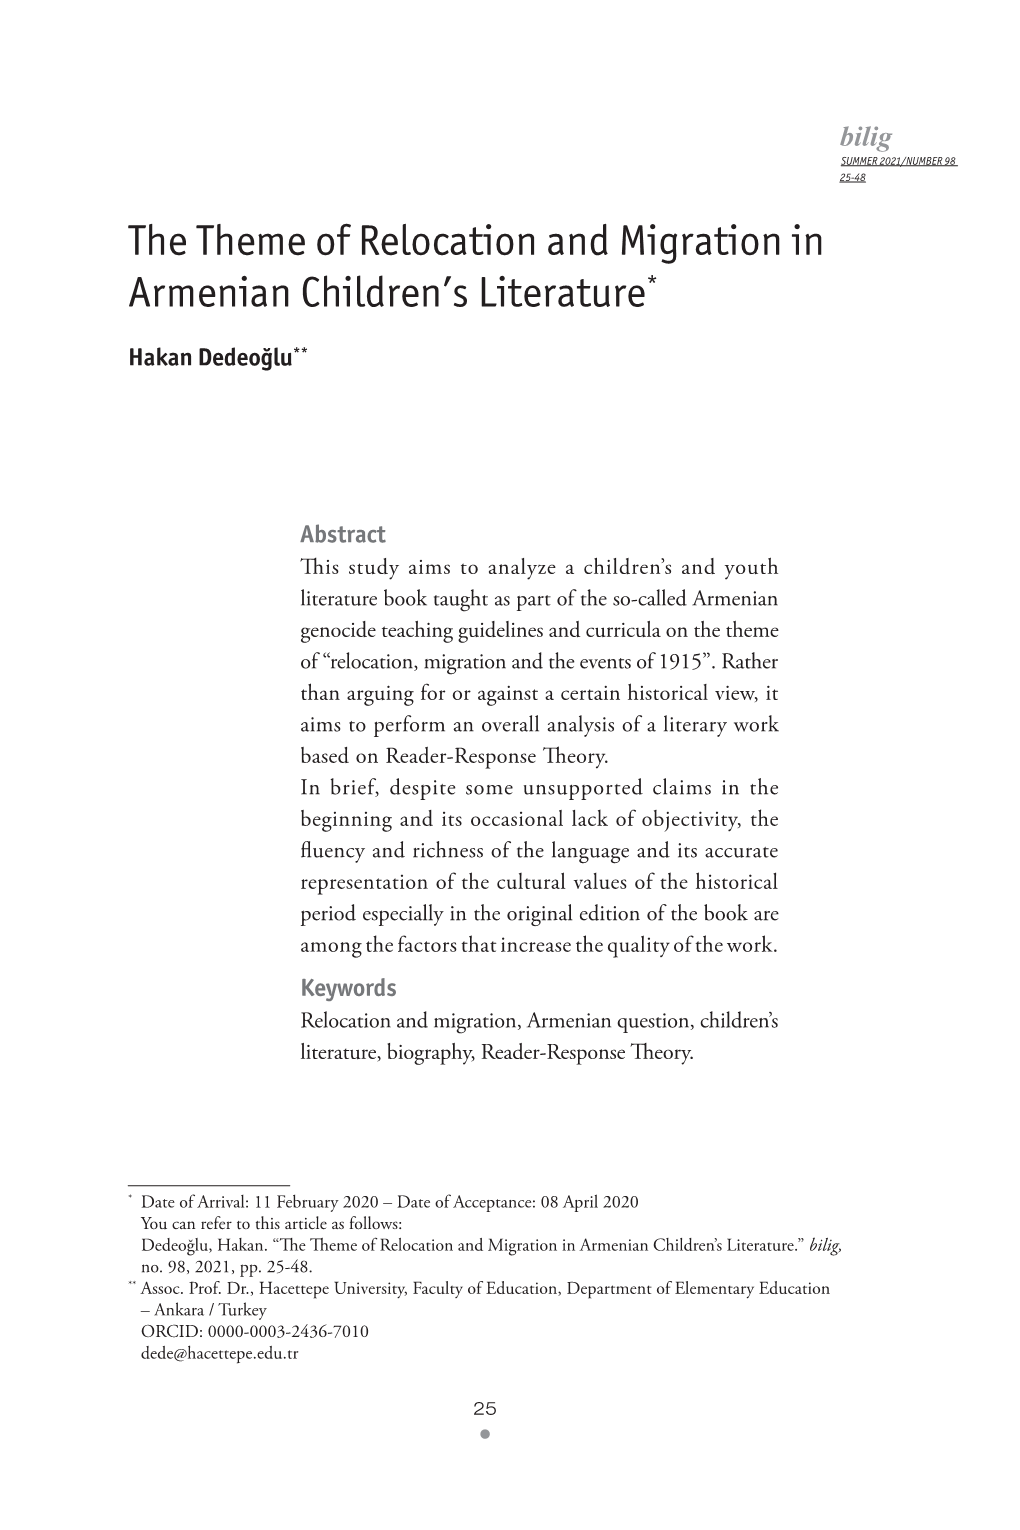 The Theme of Relocation and Migration in Armenian Children's